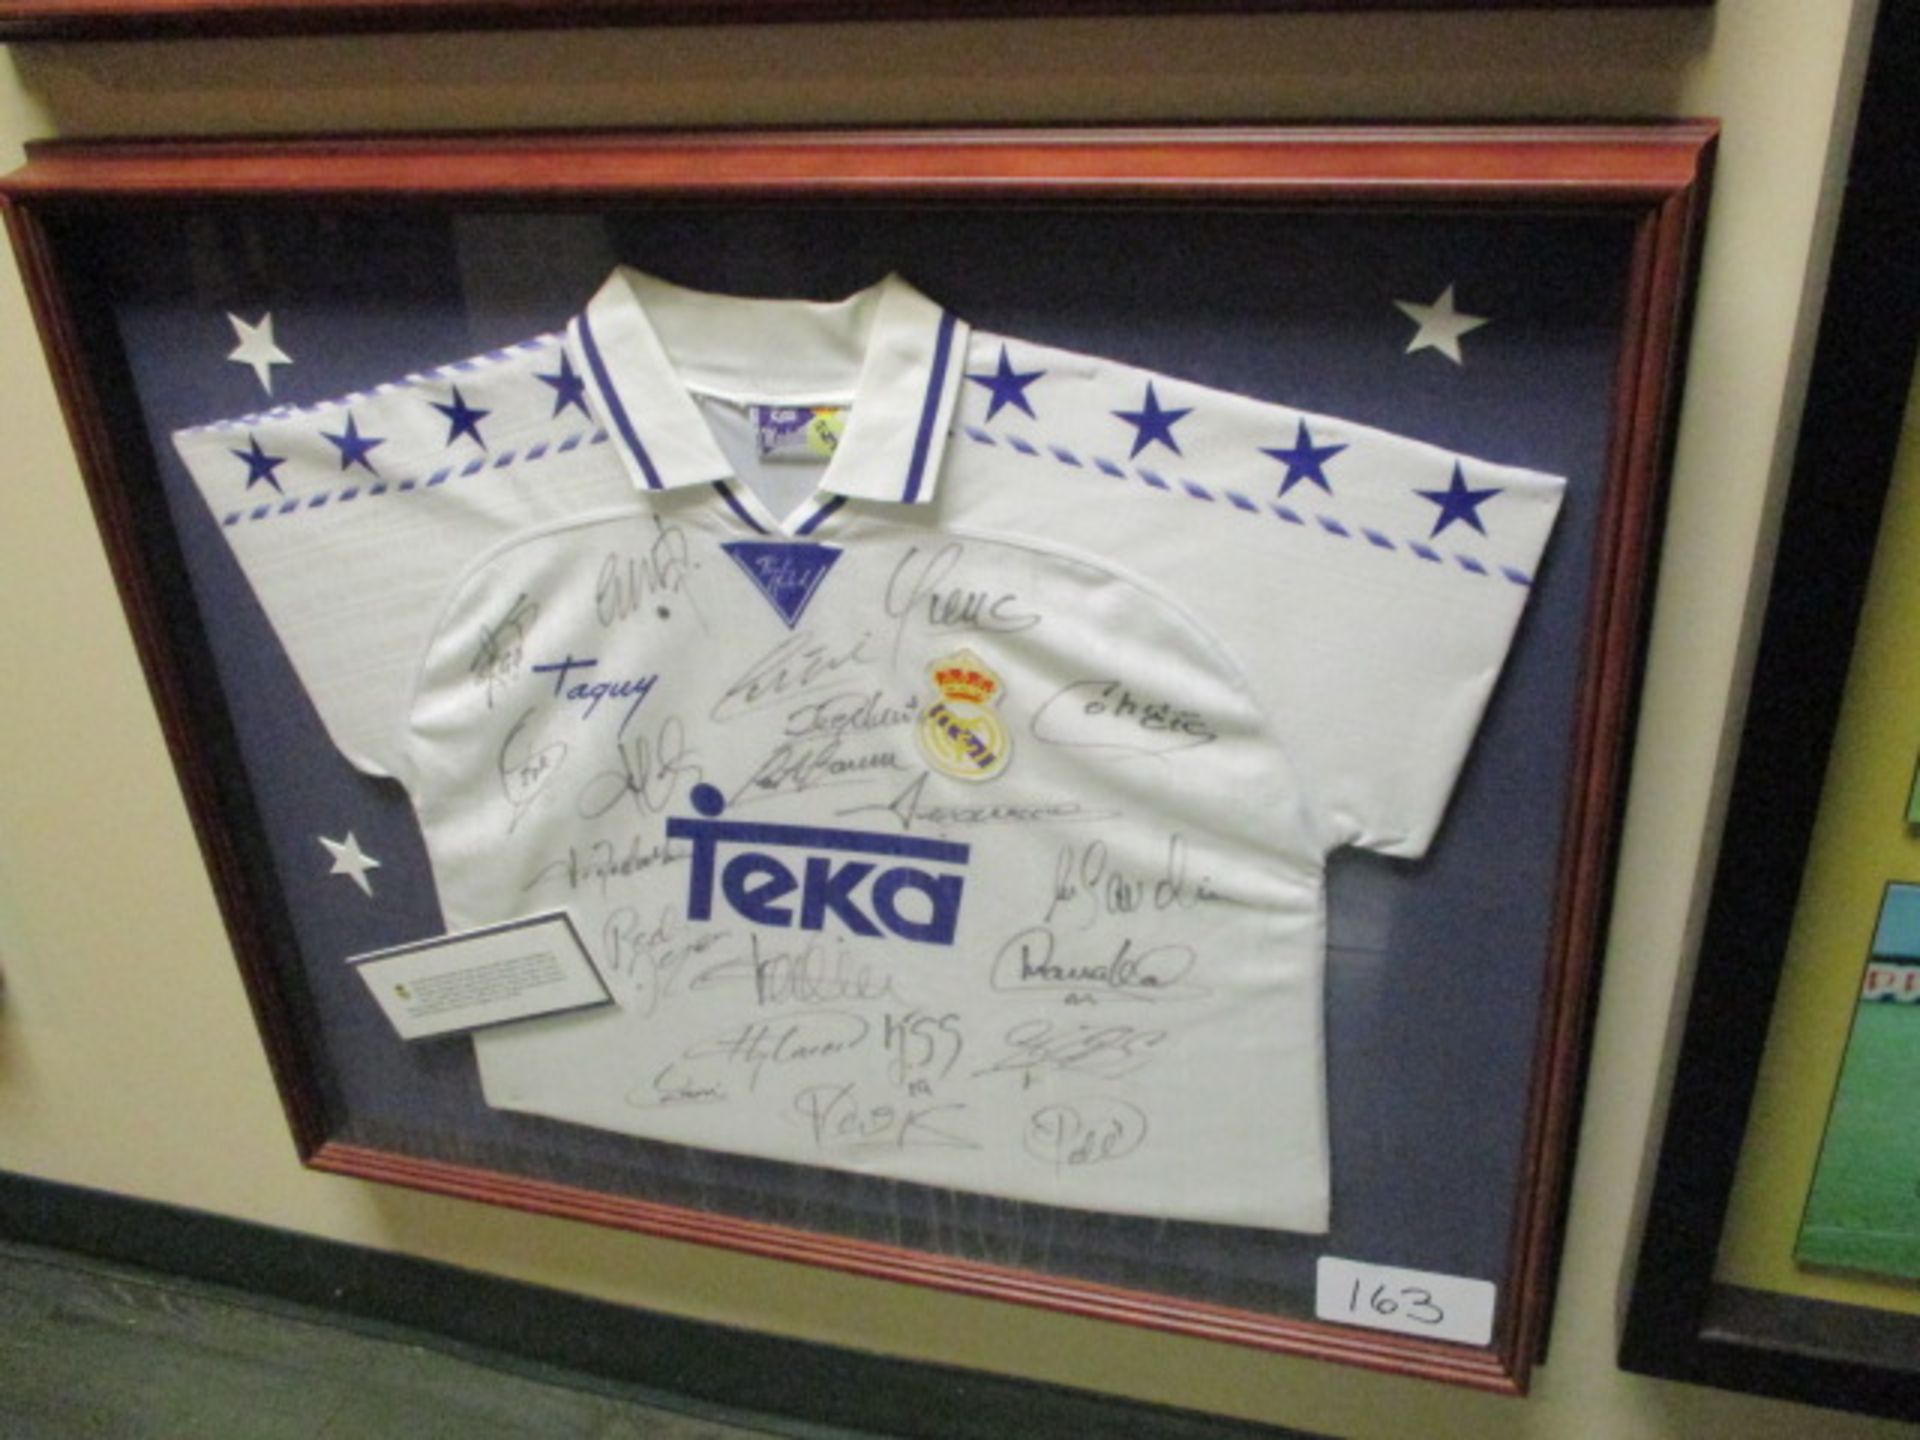 Official Real Madrid shirt (No.4 Roberto Carlos on back) has been signed by members of the 1997/98